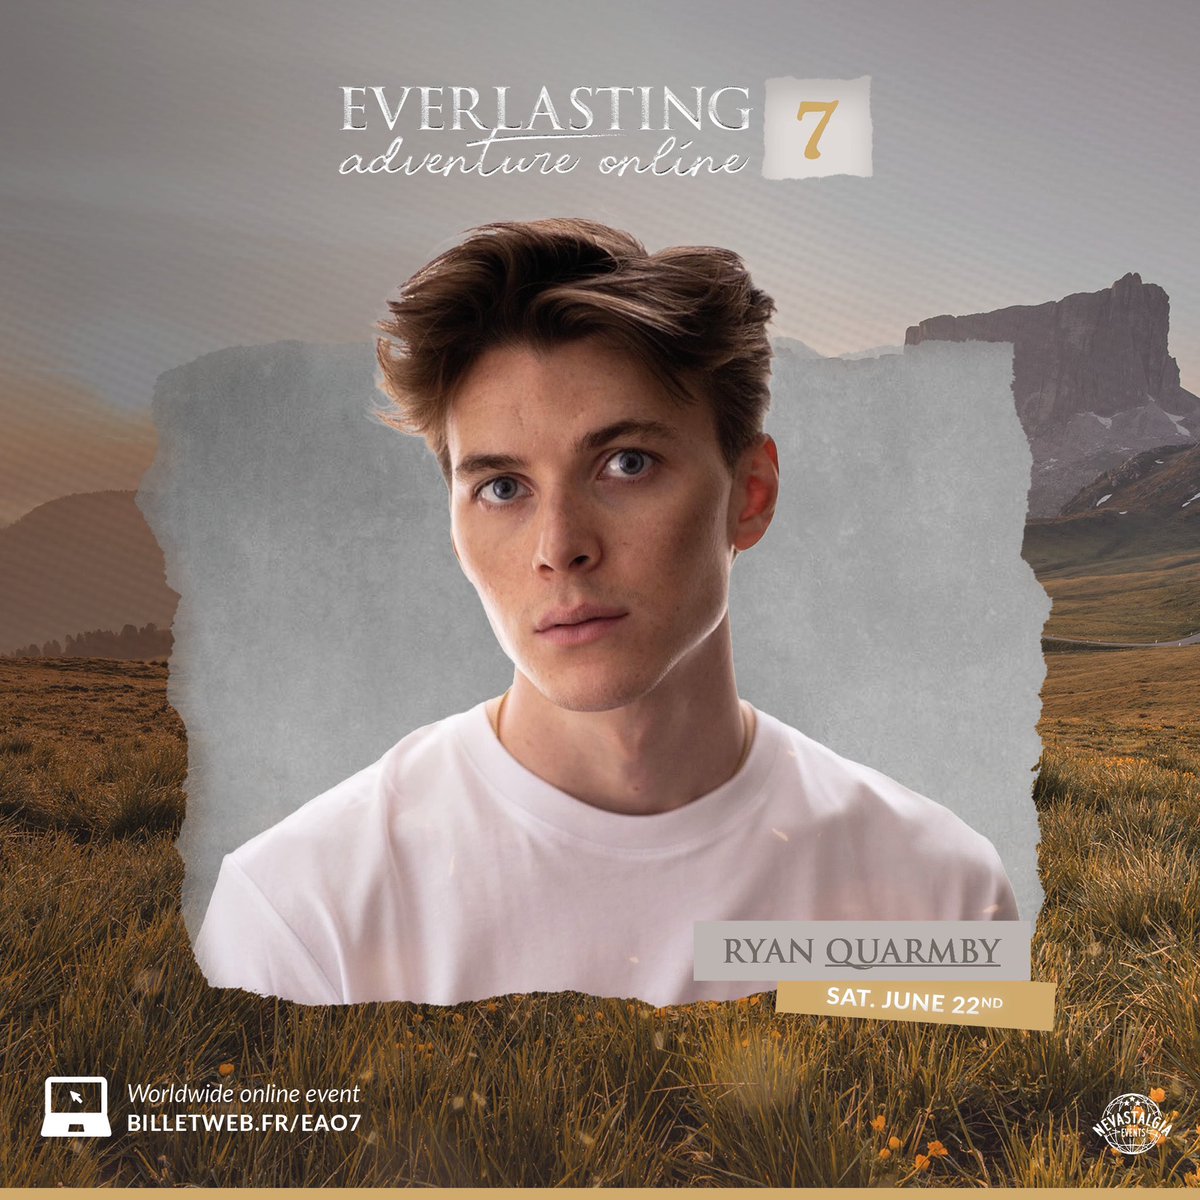 #EAO7 🌼💻 — He has become a regular to our events & he never misses on a chance to connect with you: Ryan Quarmby is our 1st guest.

The ticketing will open on Wed. May 15 at 9pm (CEST). See you in 30 minutes for the next announcement 💛

#TheLastKingdom